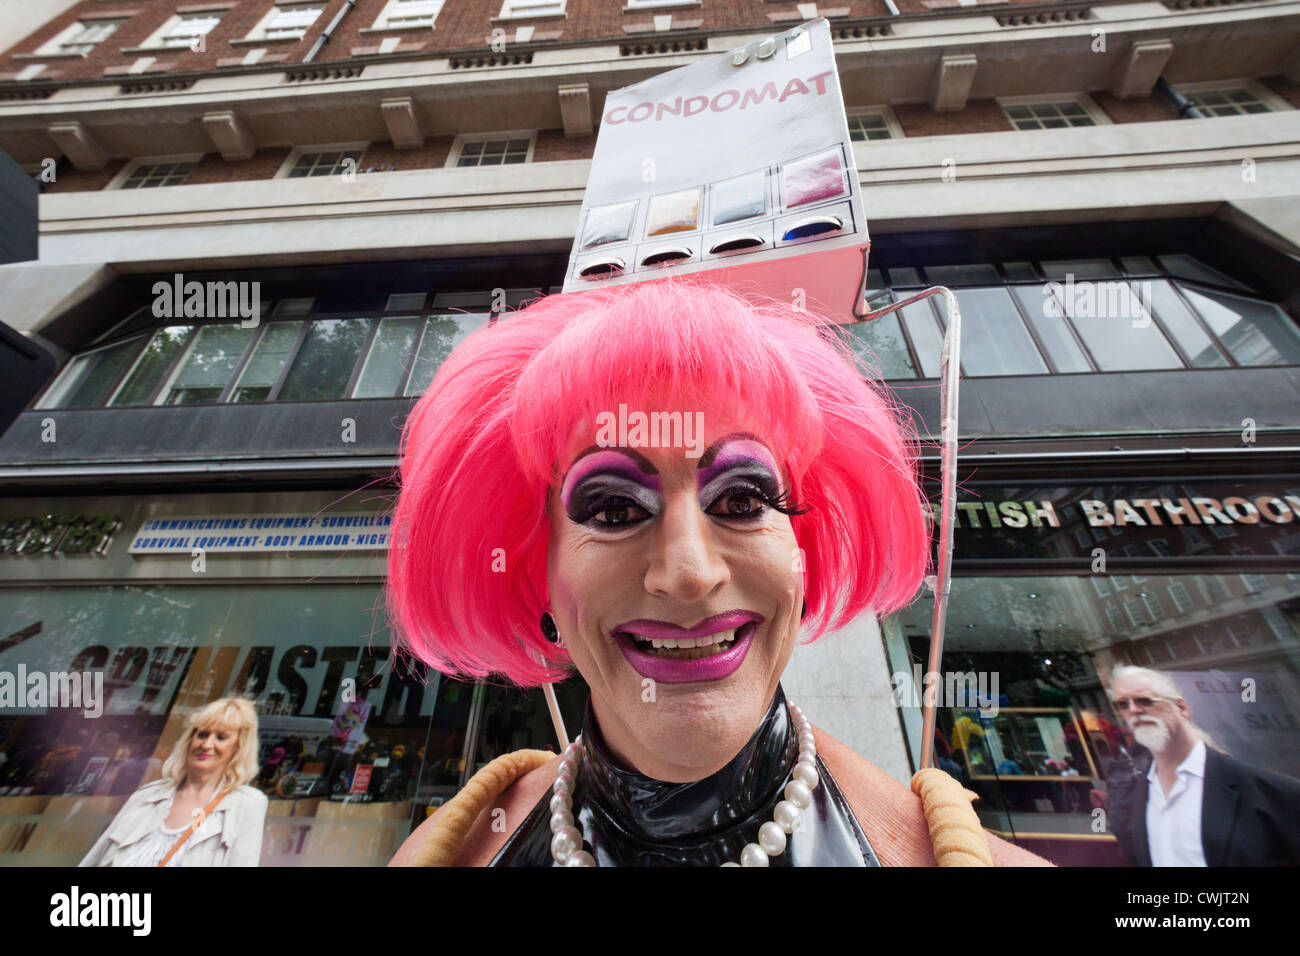 England, London, The Annual Gay Pride Parade, Female Impersonator ... picture